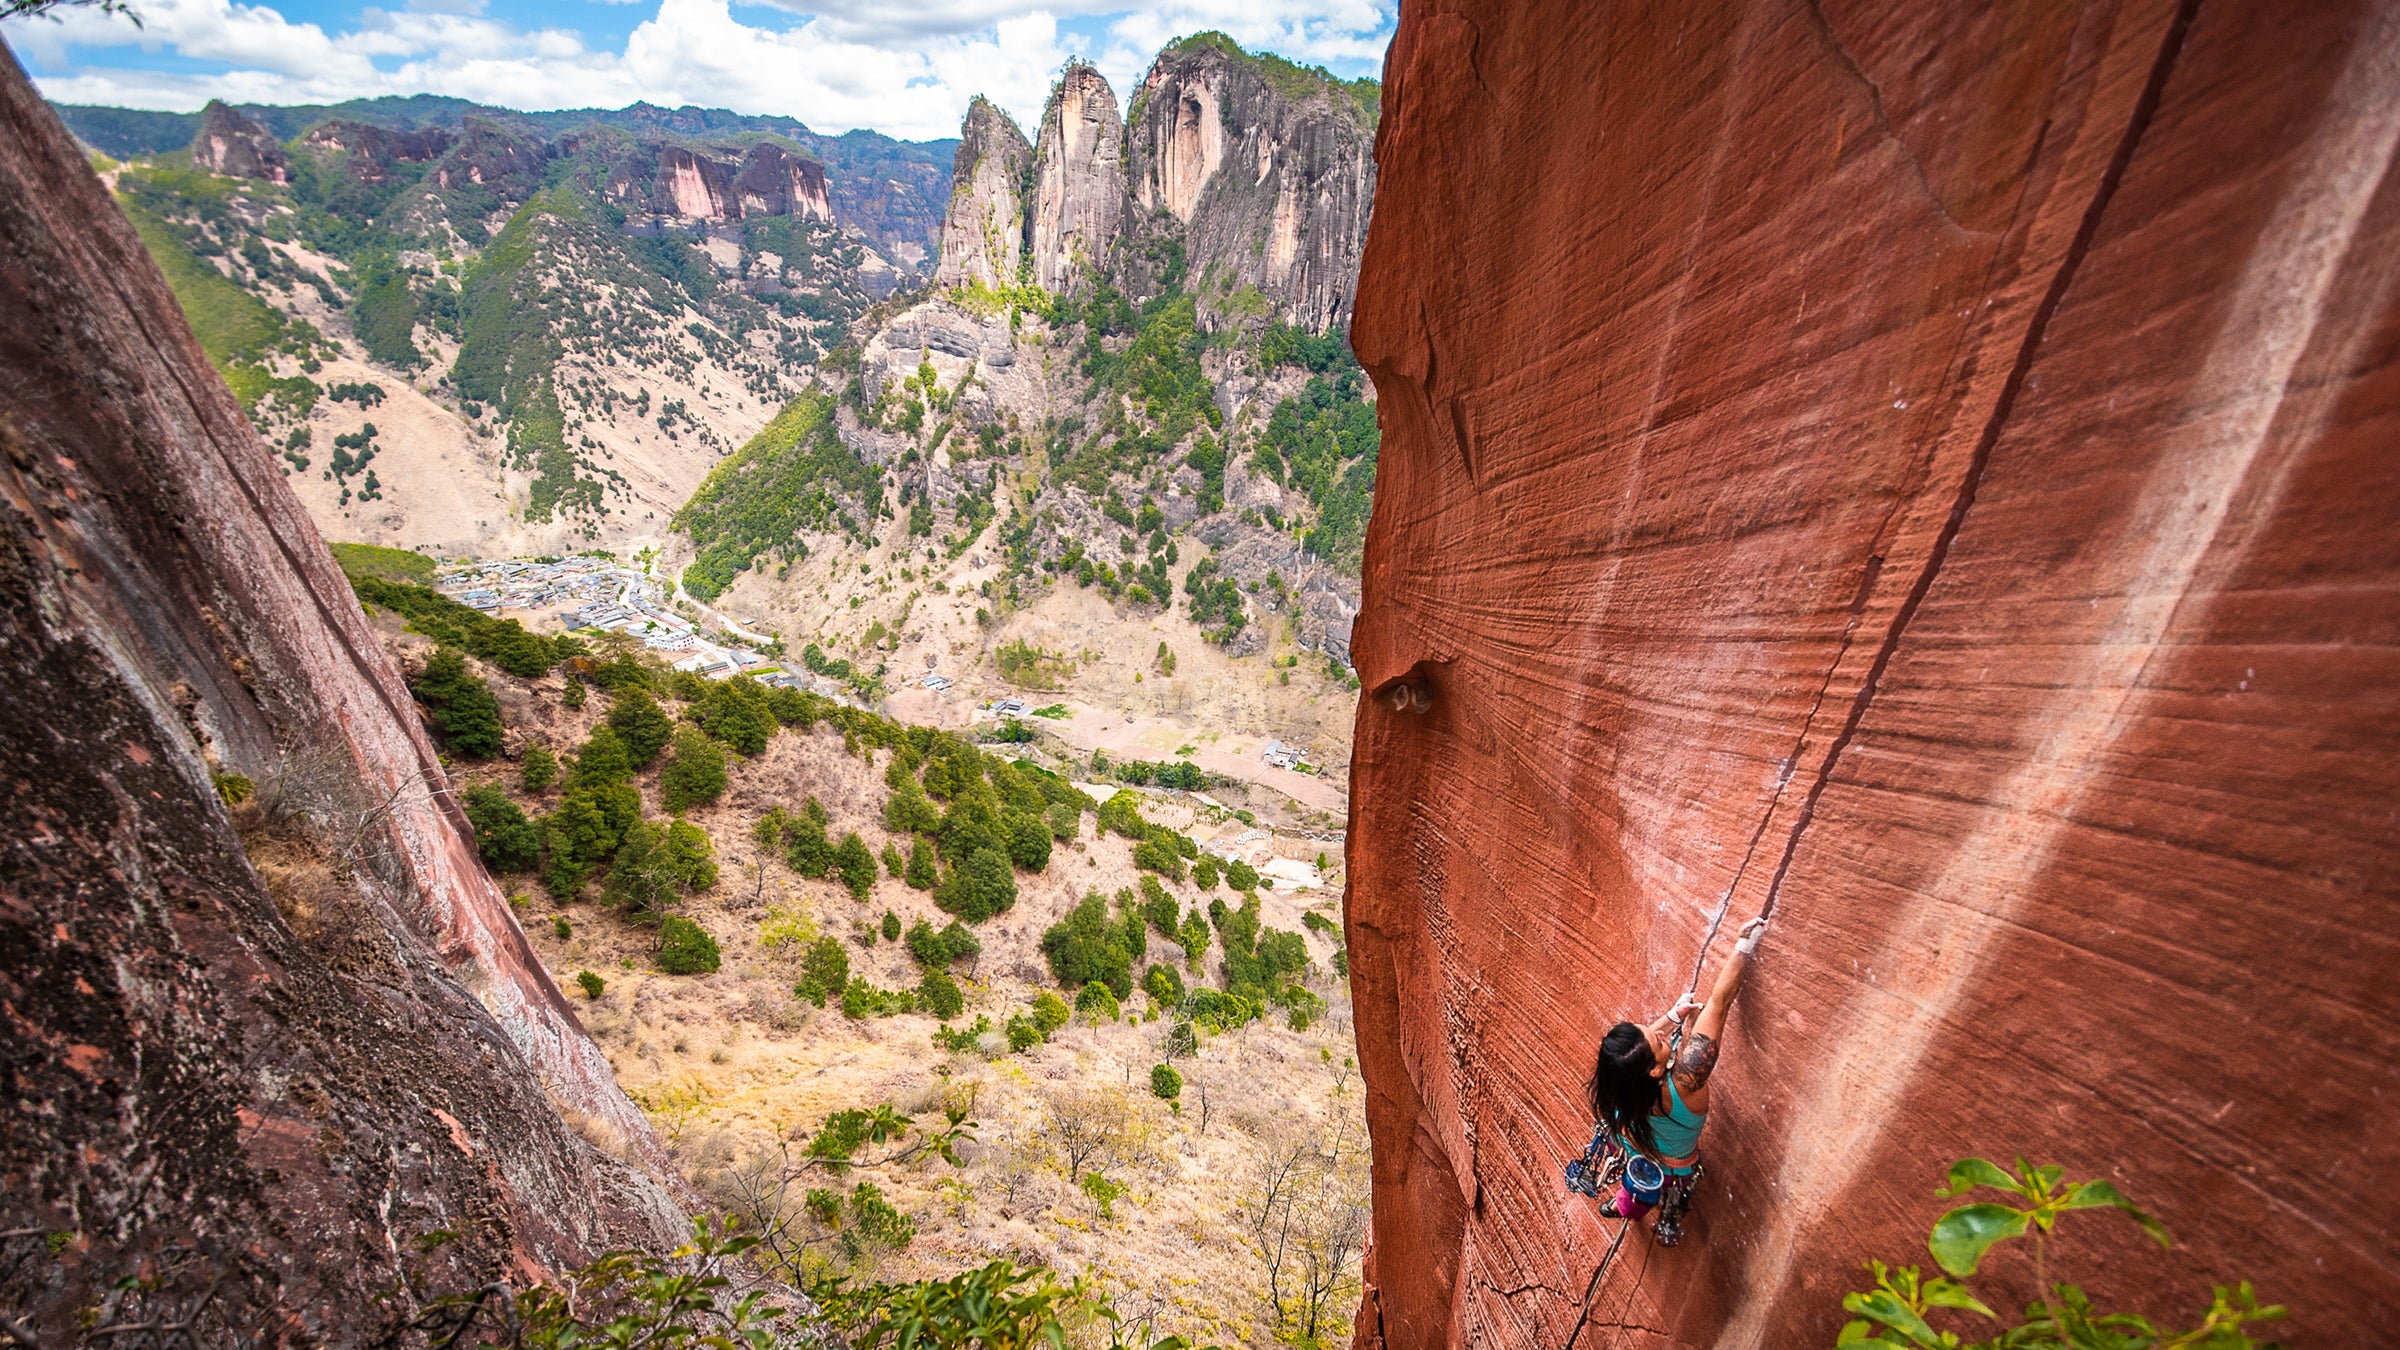 China Is an Underrated Rock Climbing Paradise